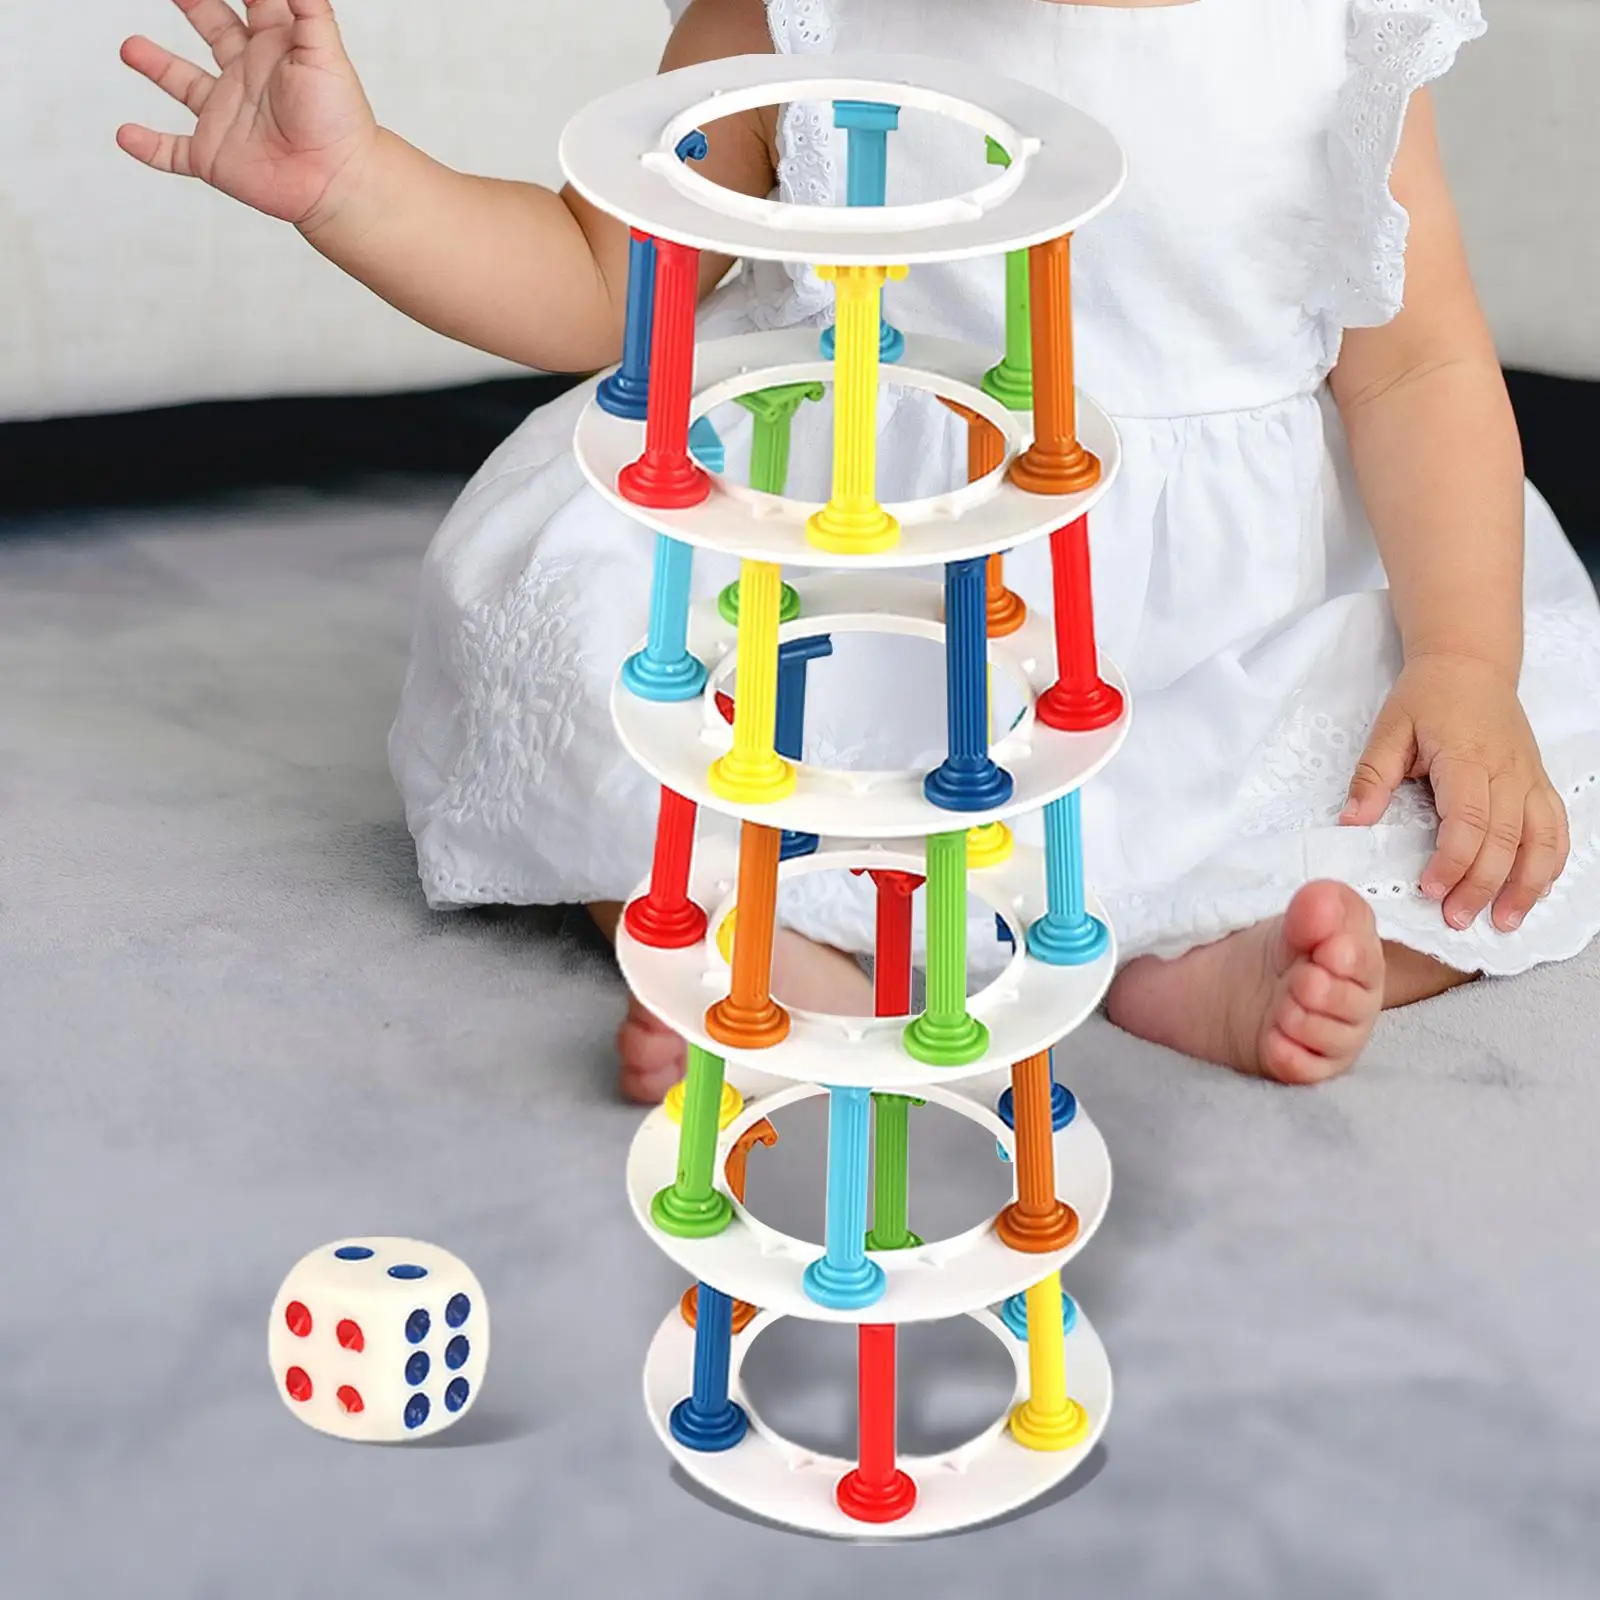 Tumble Tower Game Fine Motor Skill Balancing Puzzles Game Classic Montessori Toy with Dice, Tumble Tower for Family Game, Kids